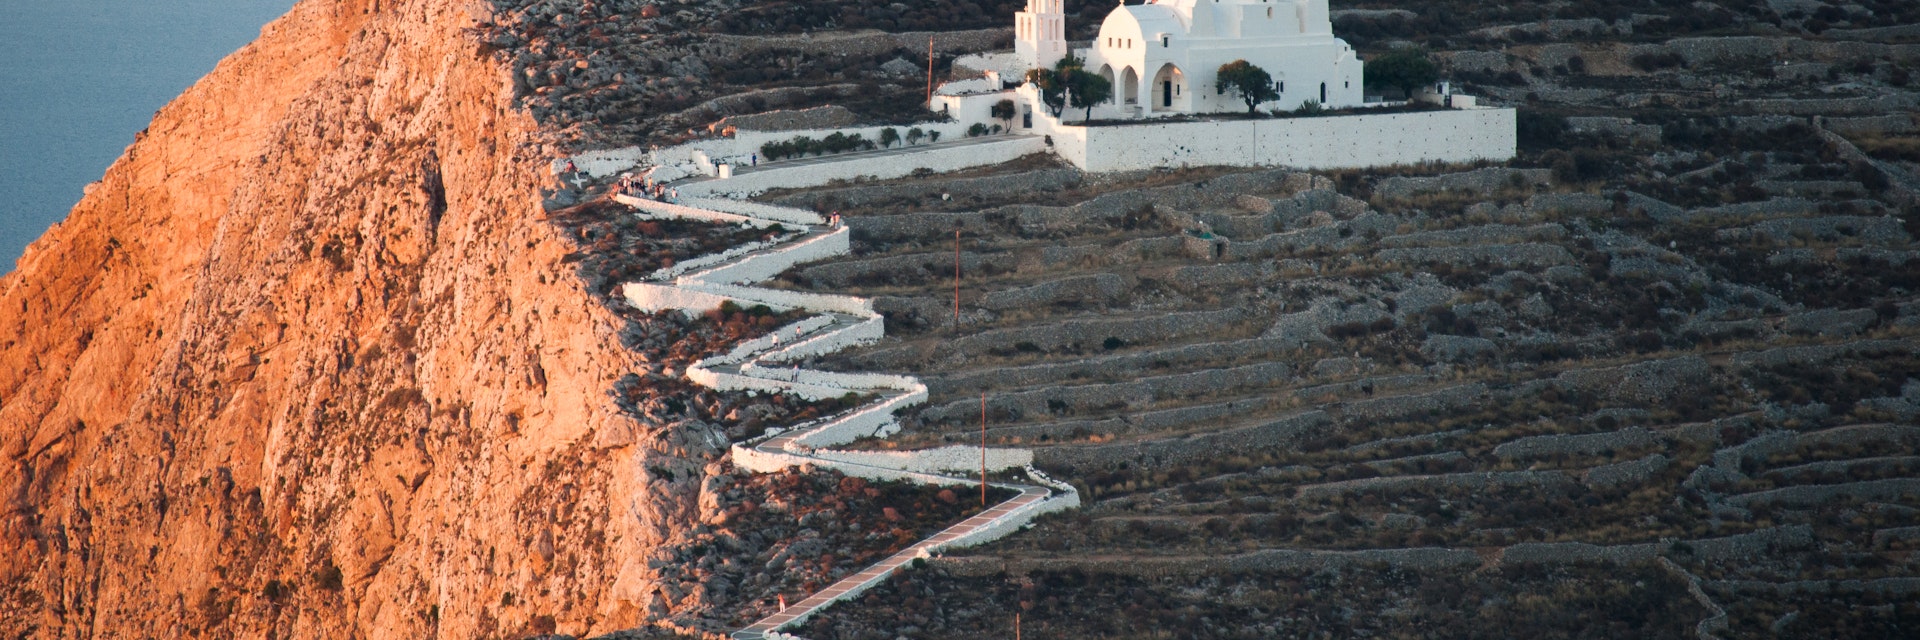 View of the church of Panagia at sunset on the Greek island of Folegandros.